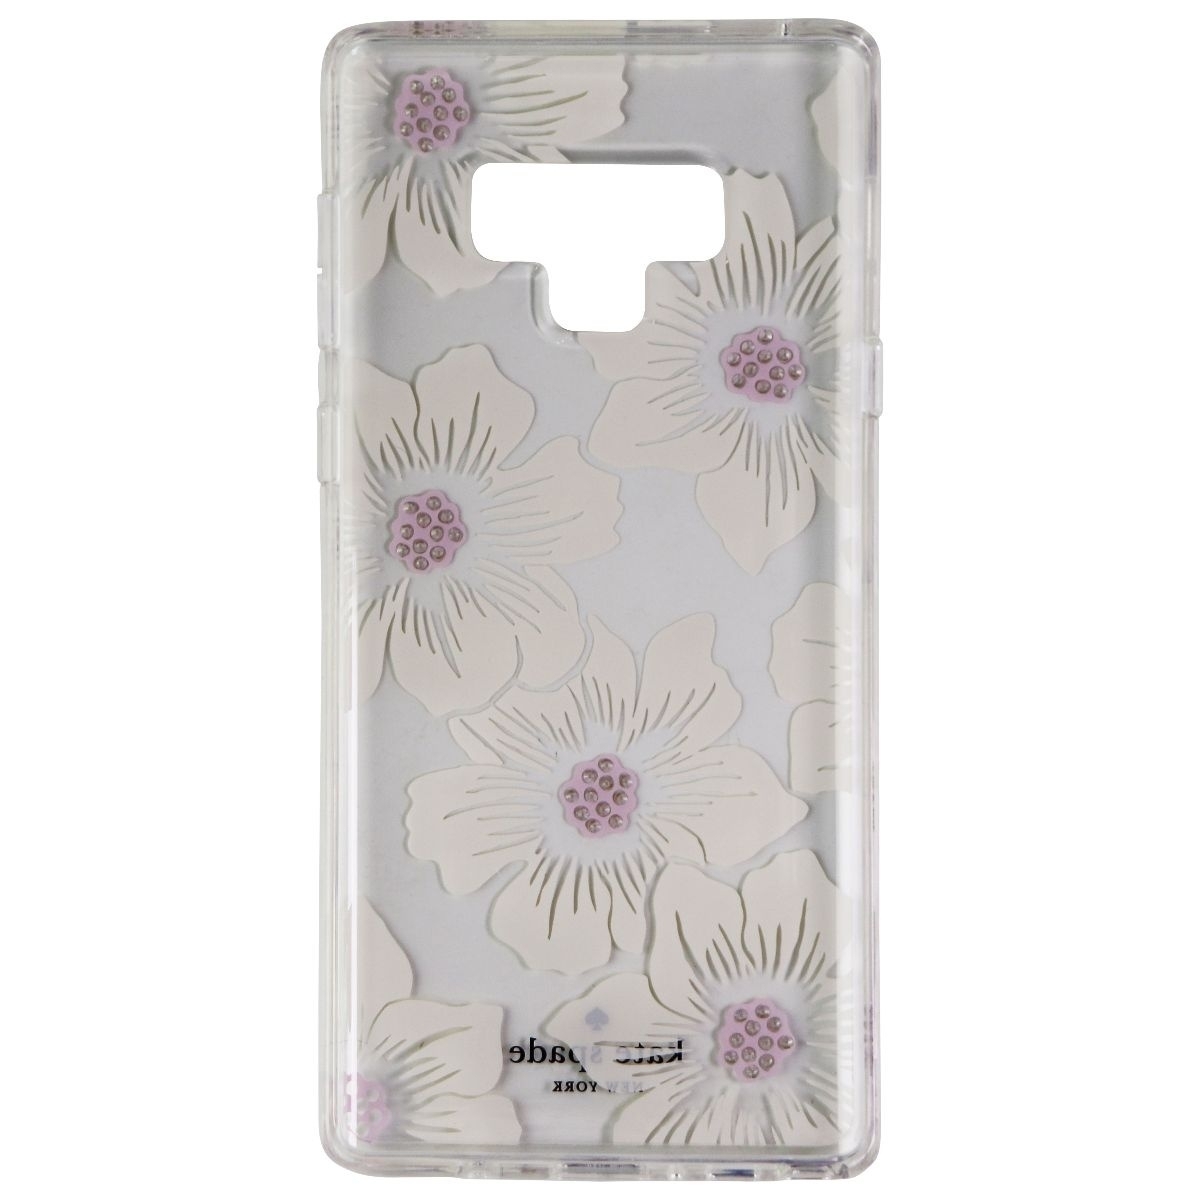 Kate Spade Hardshell Case For Samsung Galaxy Note9 - Clear/Hollyhock Floral/Gems